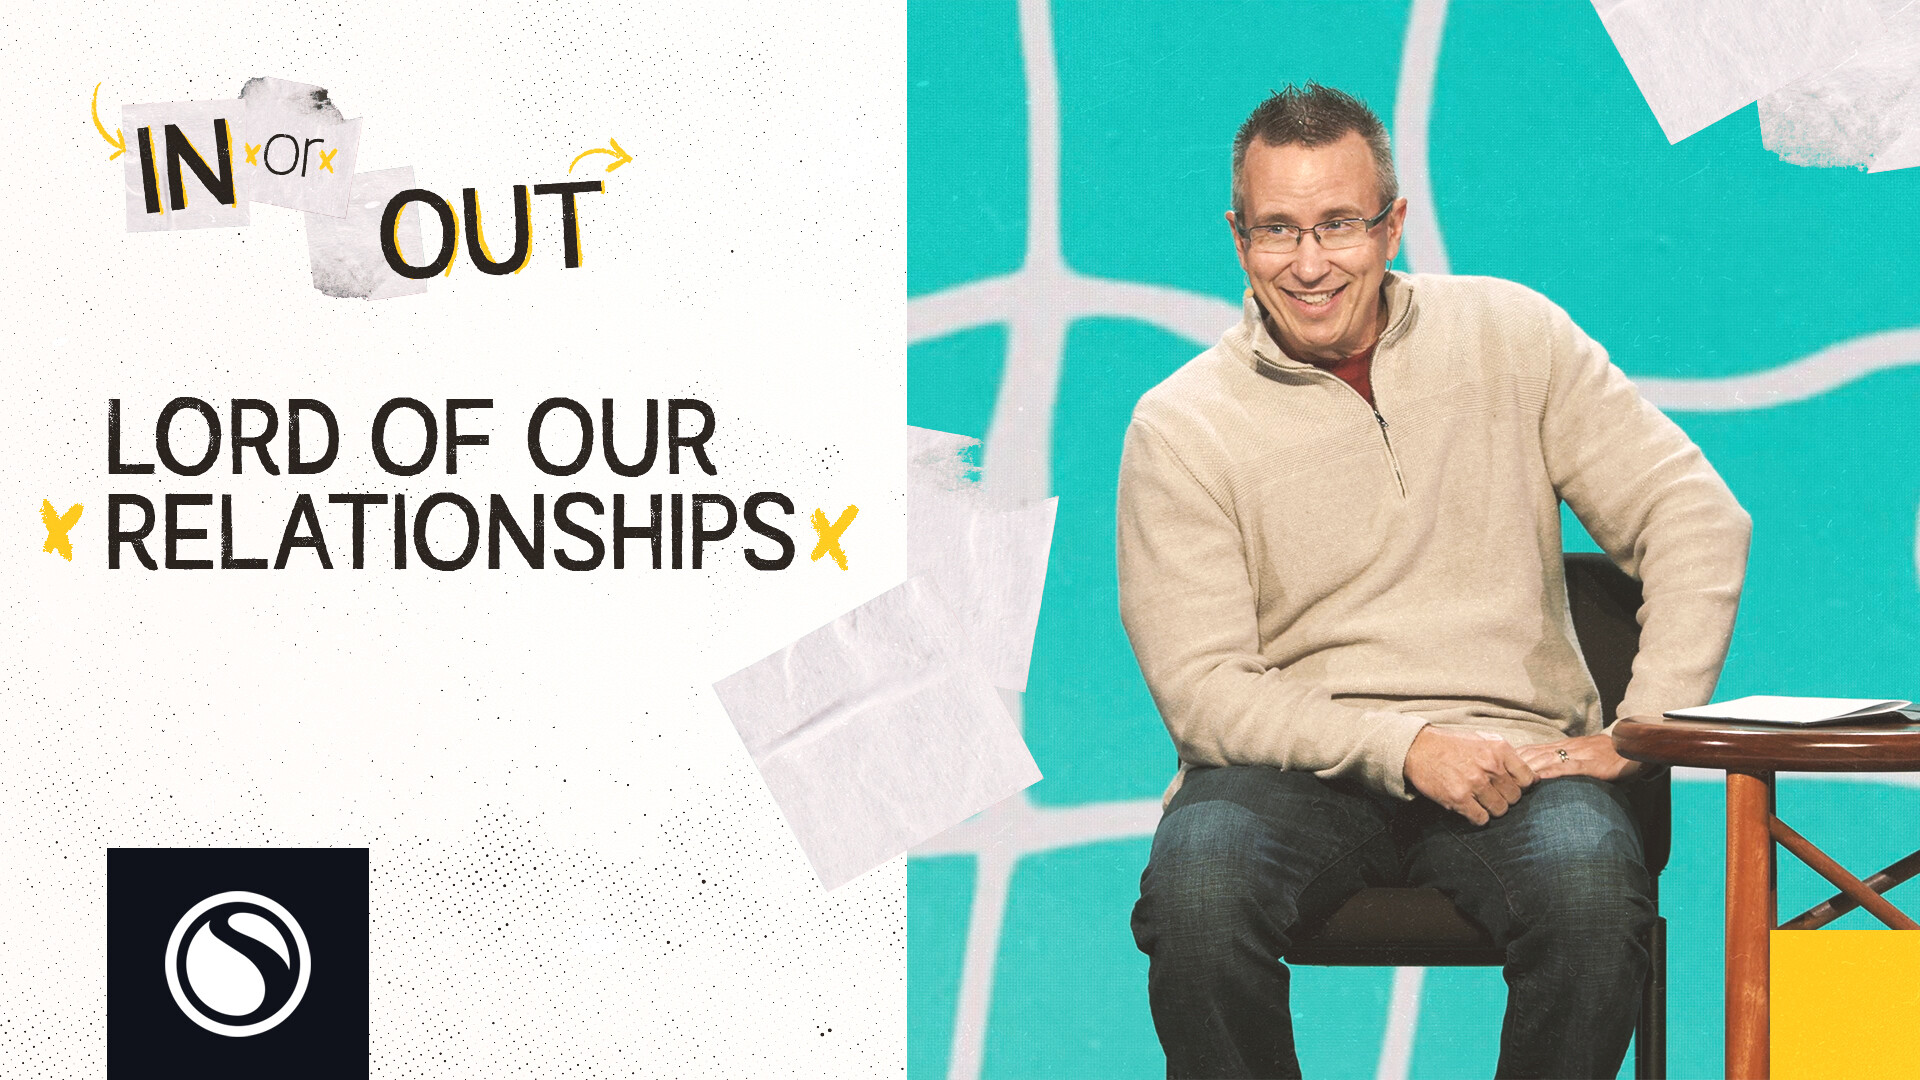 Watch In or Out - Lord of Our Relationships